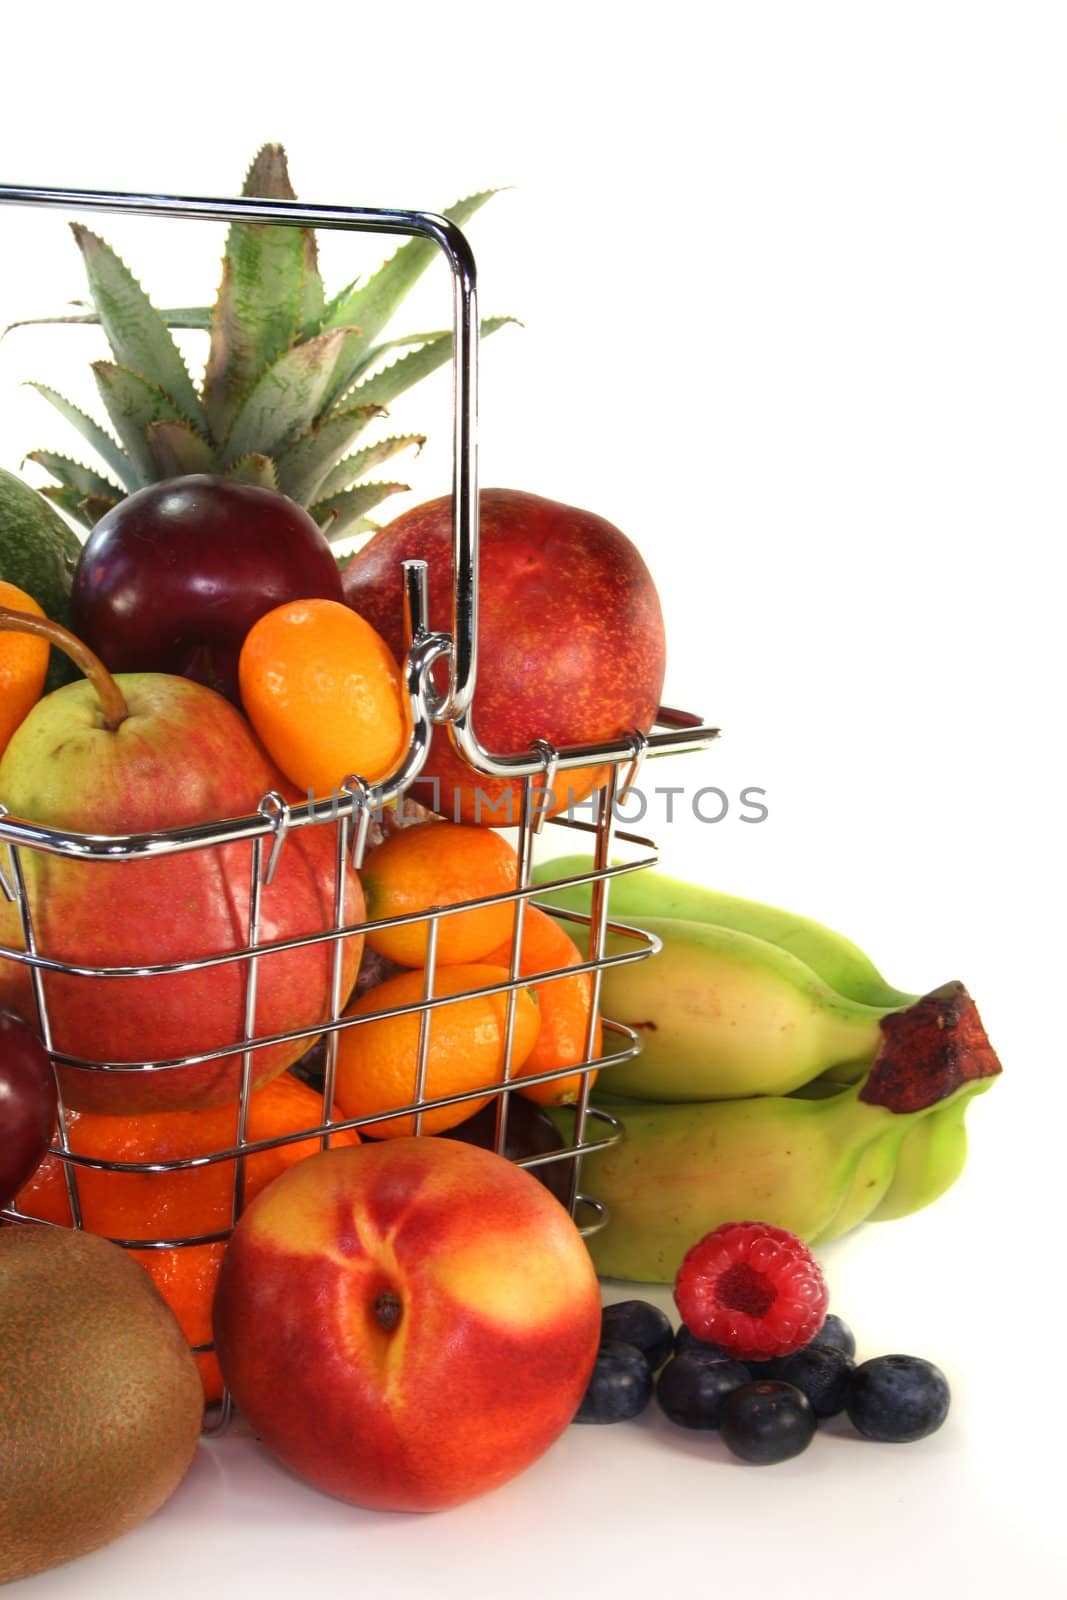 Fruit Mix in the Shopping basket by discovery